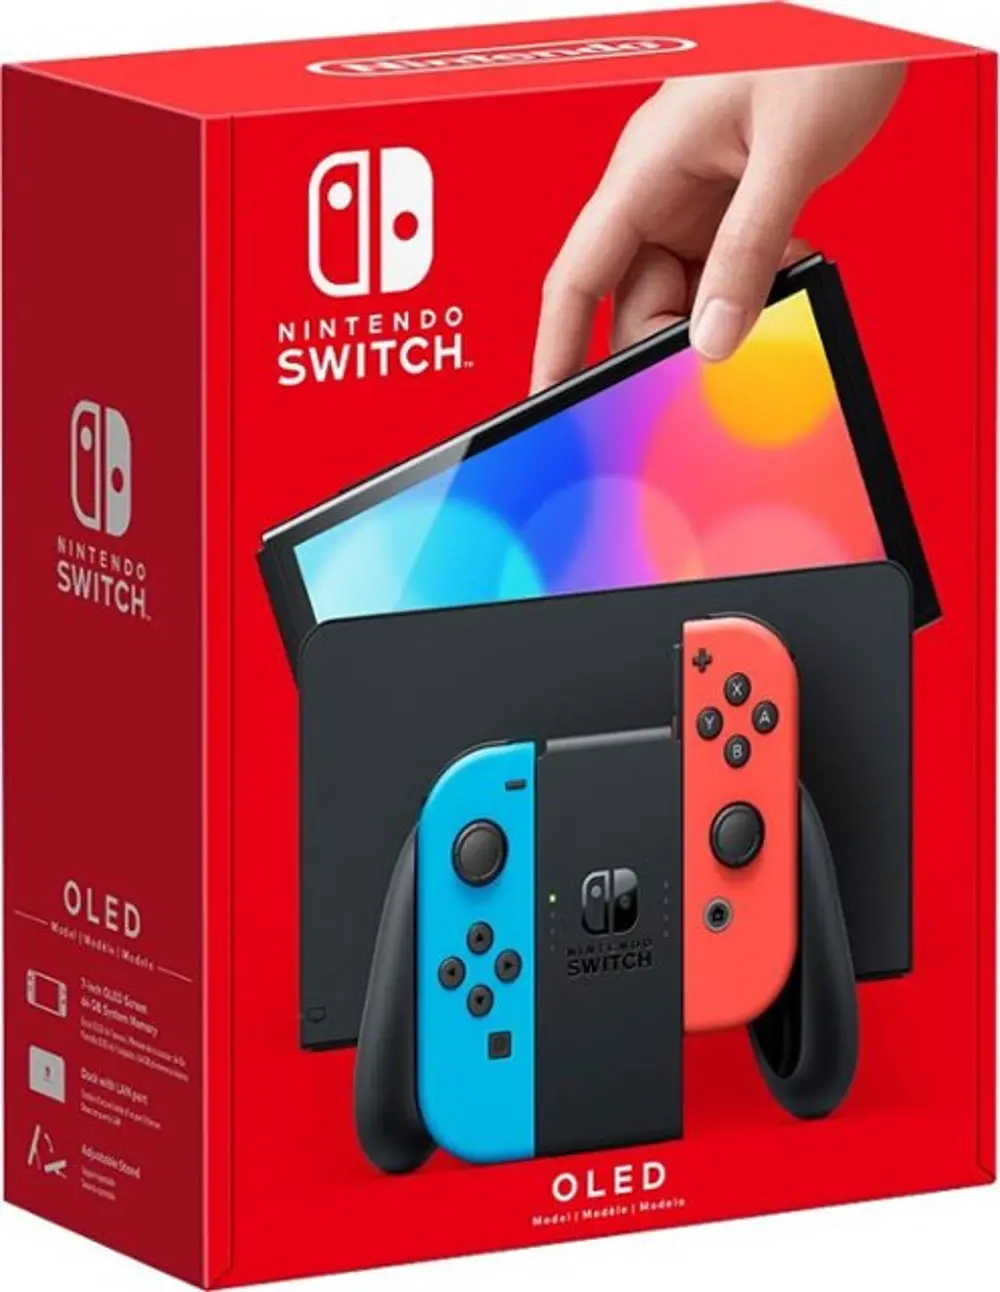 SWI_OLED_RED/BLUE Nintendo Switch OLED Model With Neon Red and Neon Blue Joy-Con-1